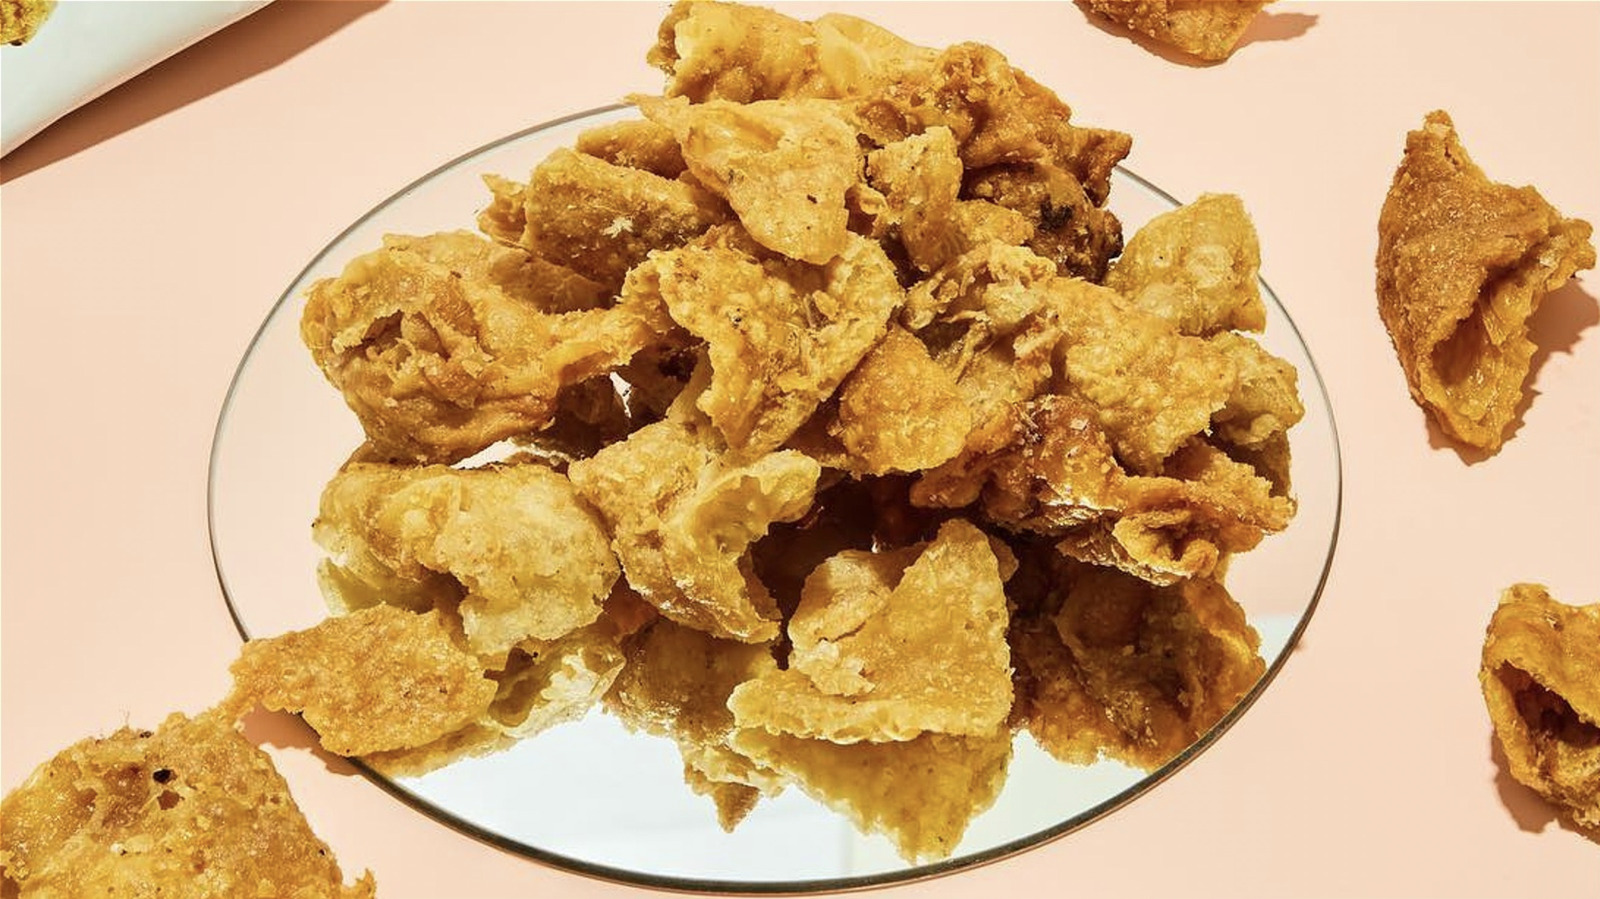 Chicken Skin Chips Are The Savory Snack You're Missing